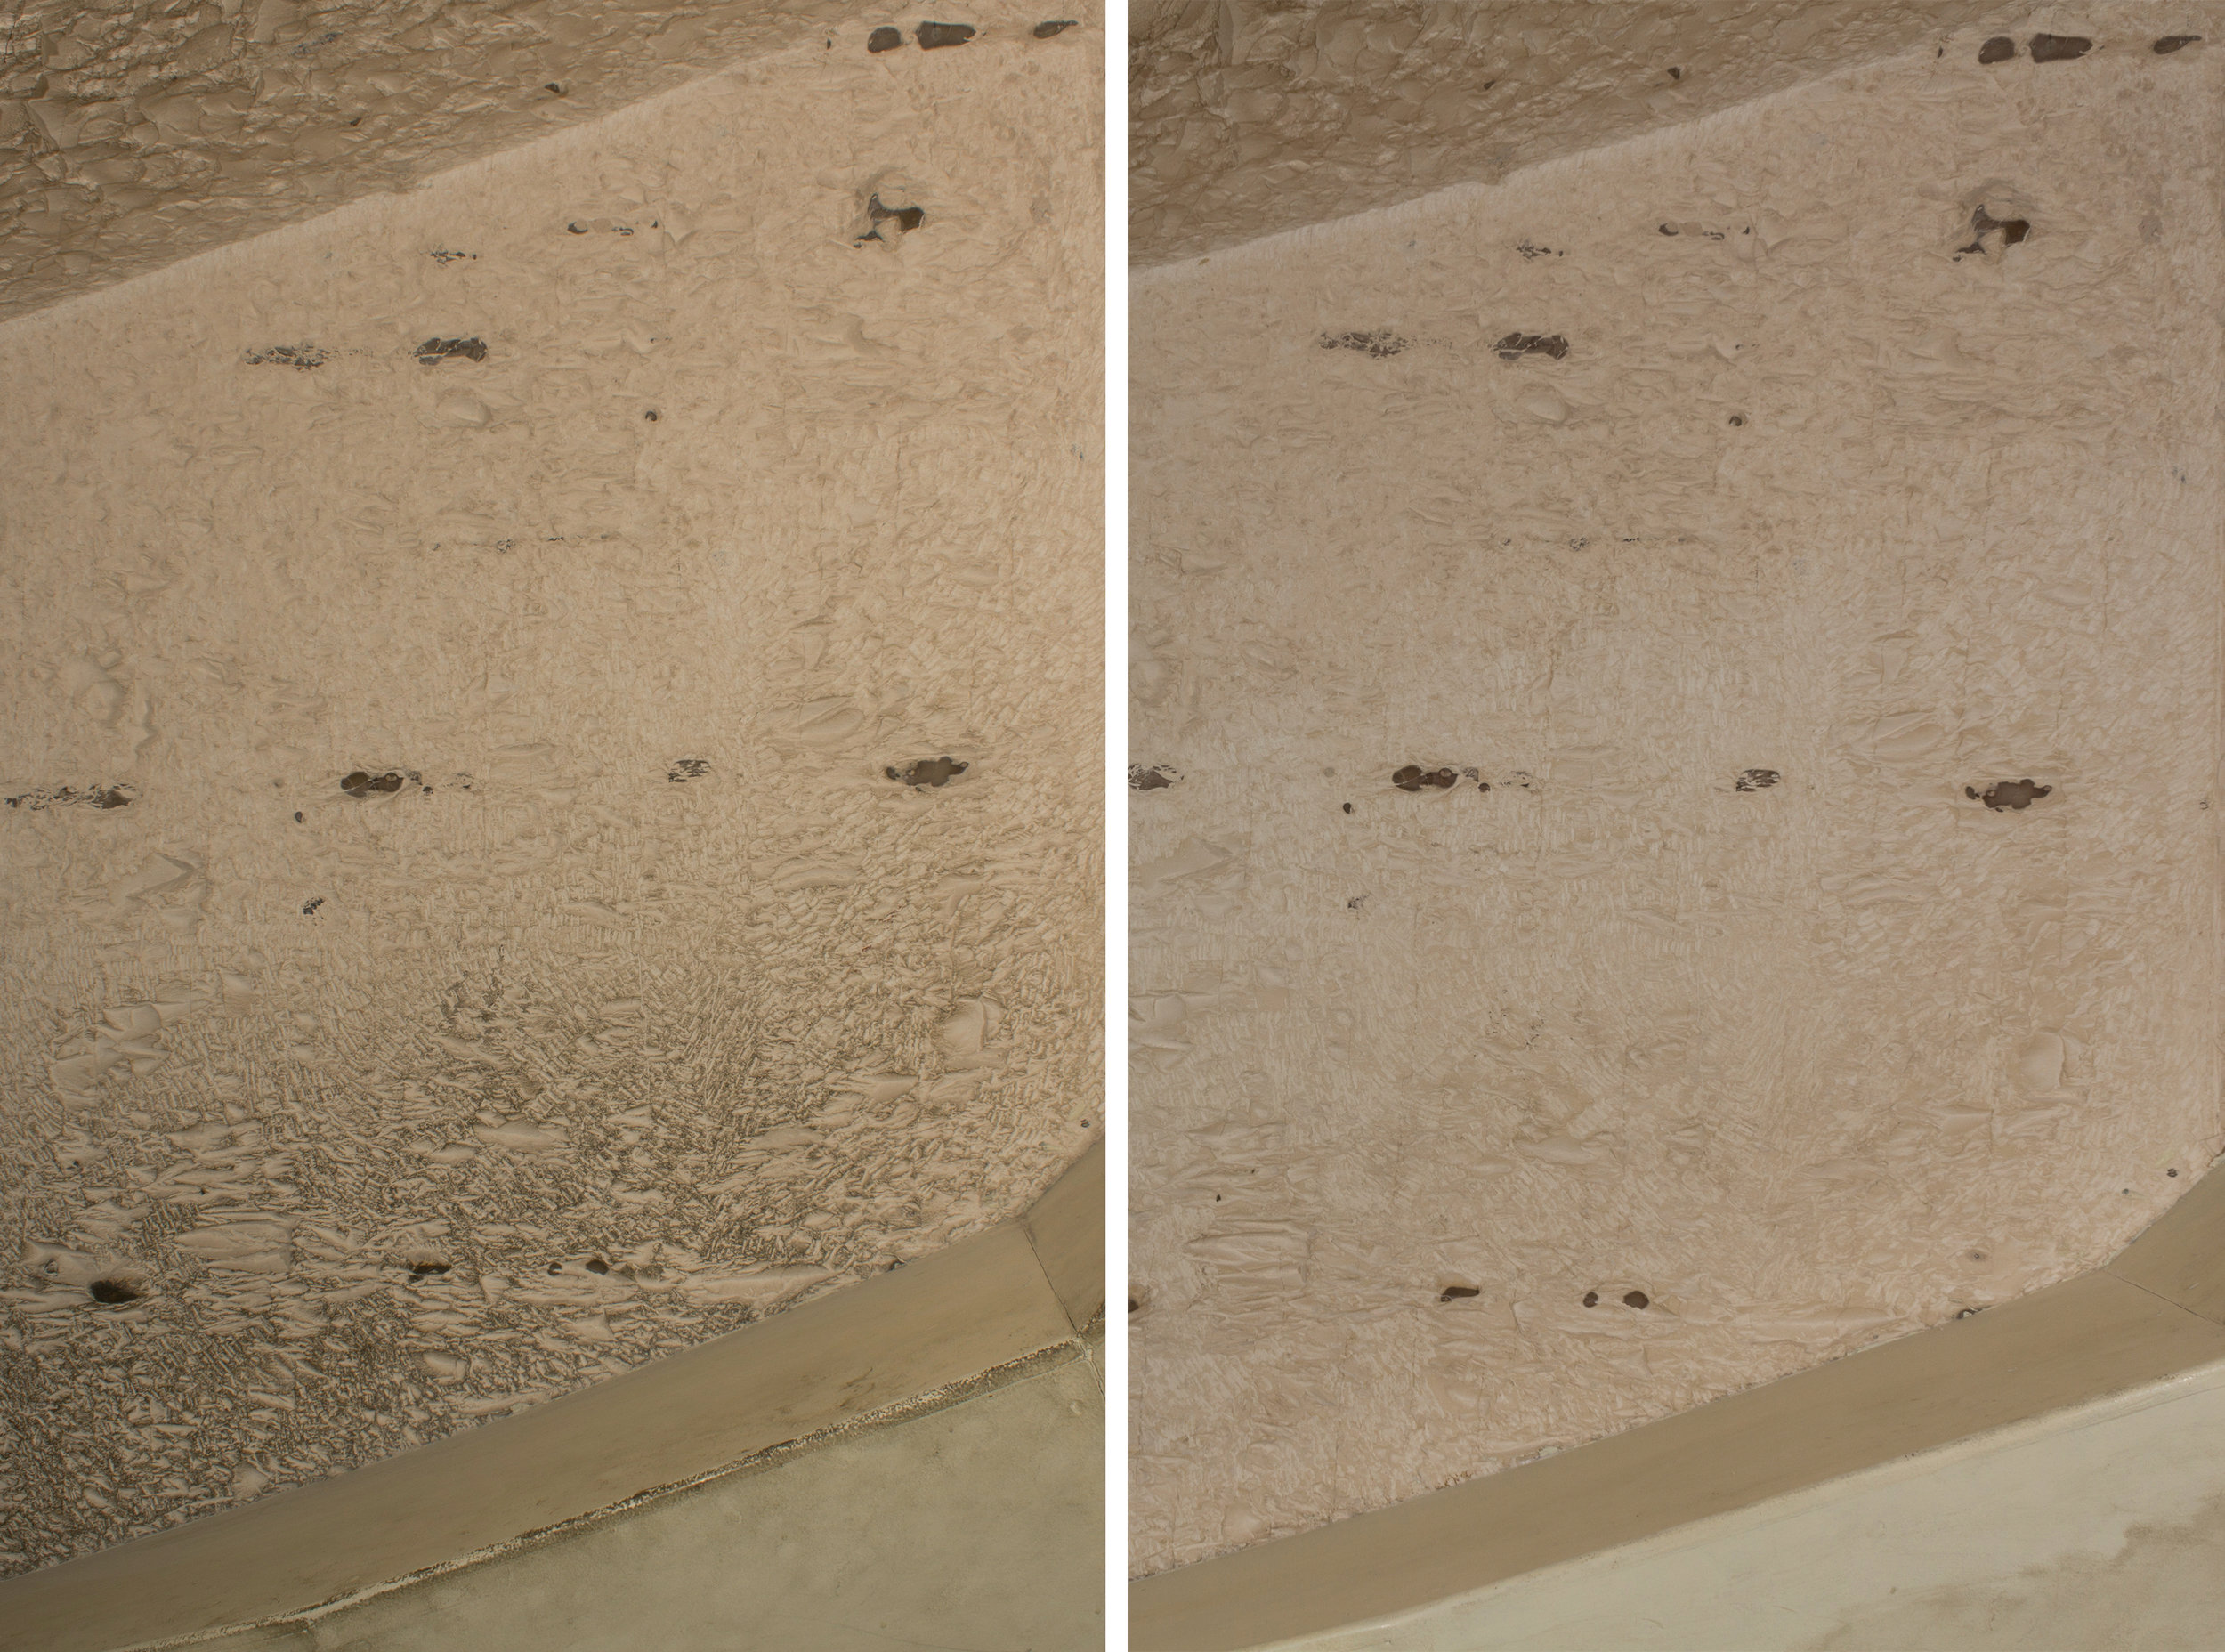  Greasy, black hand-marks in the entrance corridor shown before (left) and after (right) poultice reduction.&nbsp;  Image © J. Paul Getty Trust, 2017 